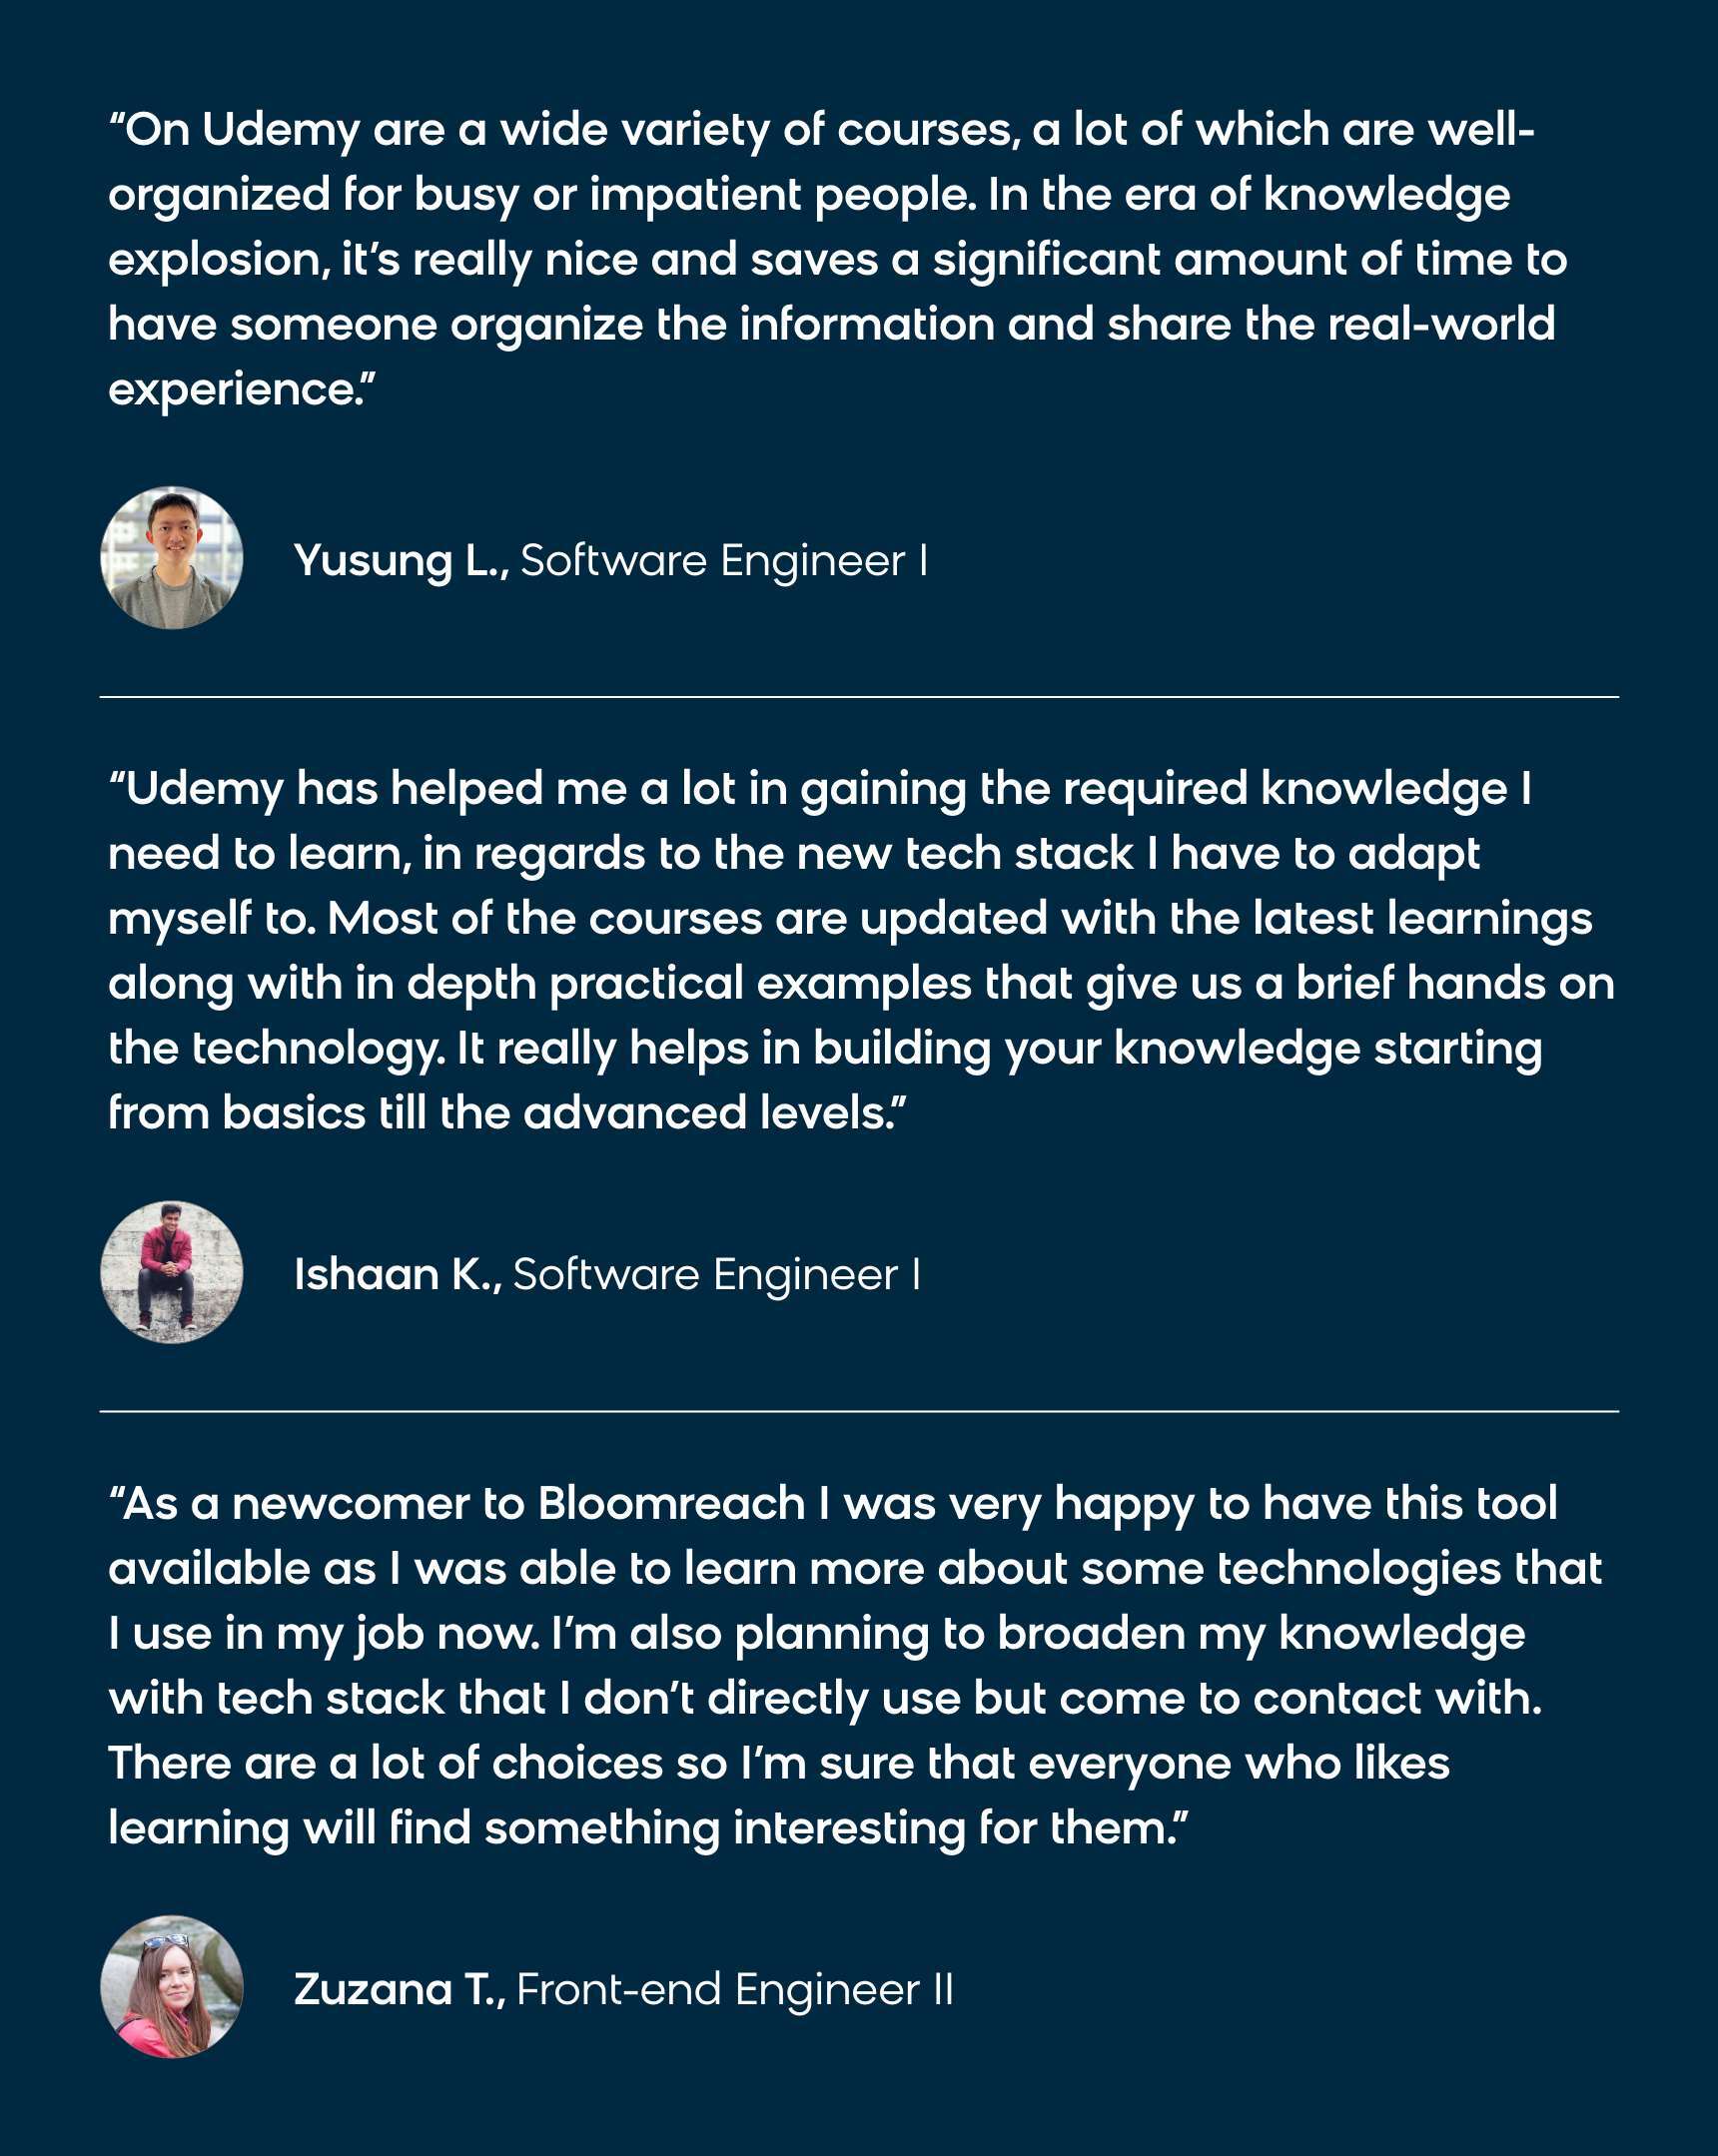 Bloomreach employees on the Udemy course offerings.